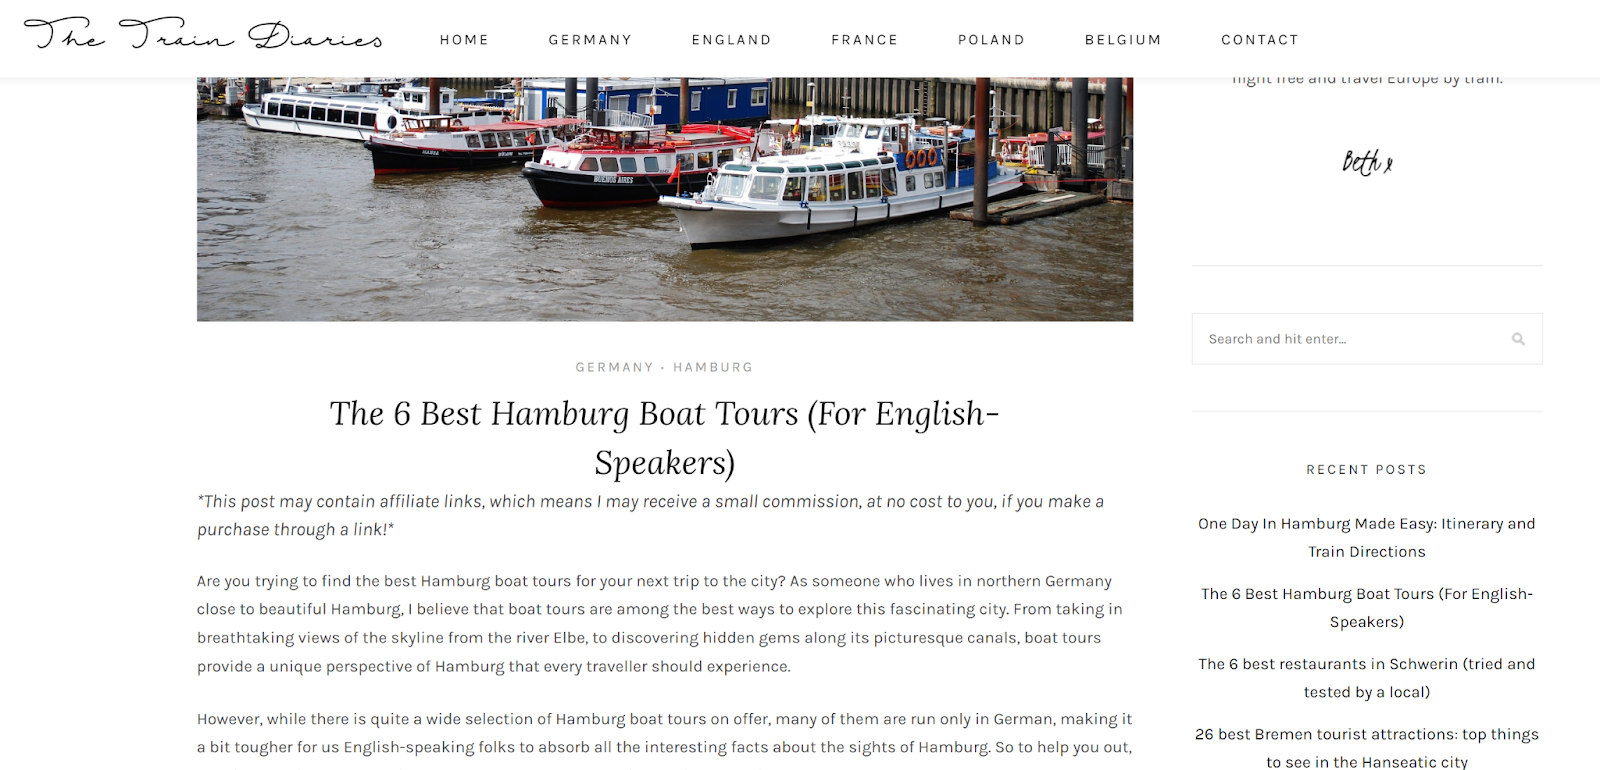 A screenshot featuring the The 6 Best Hamburg Boat Tours post on The Train Diaries website